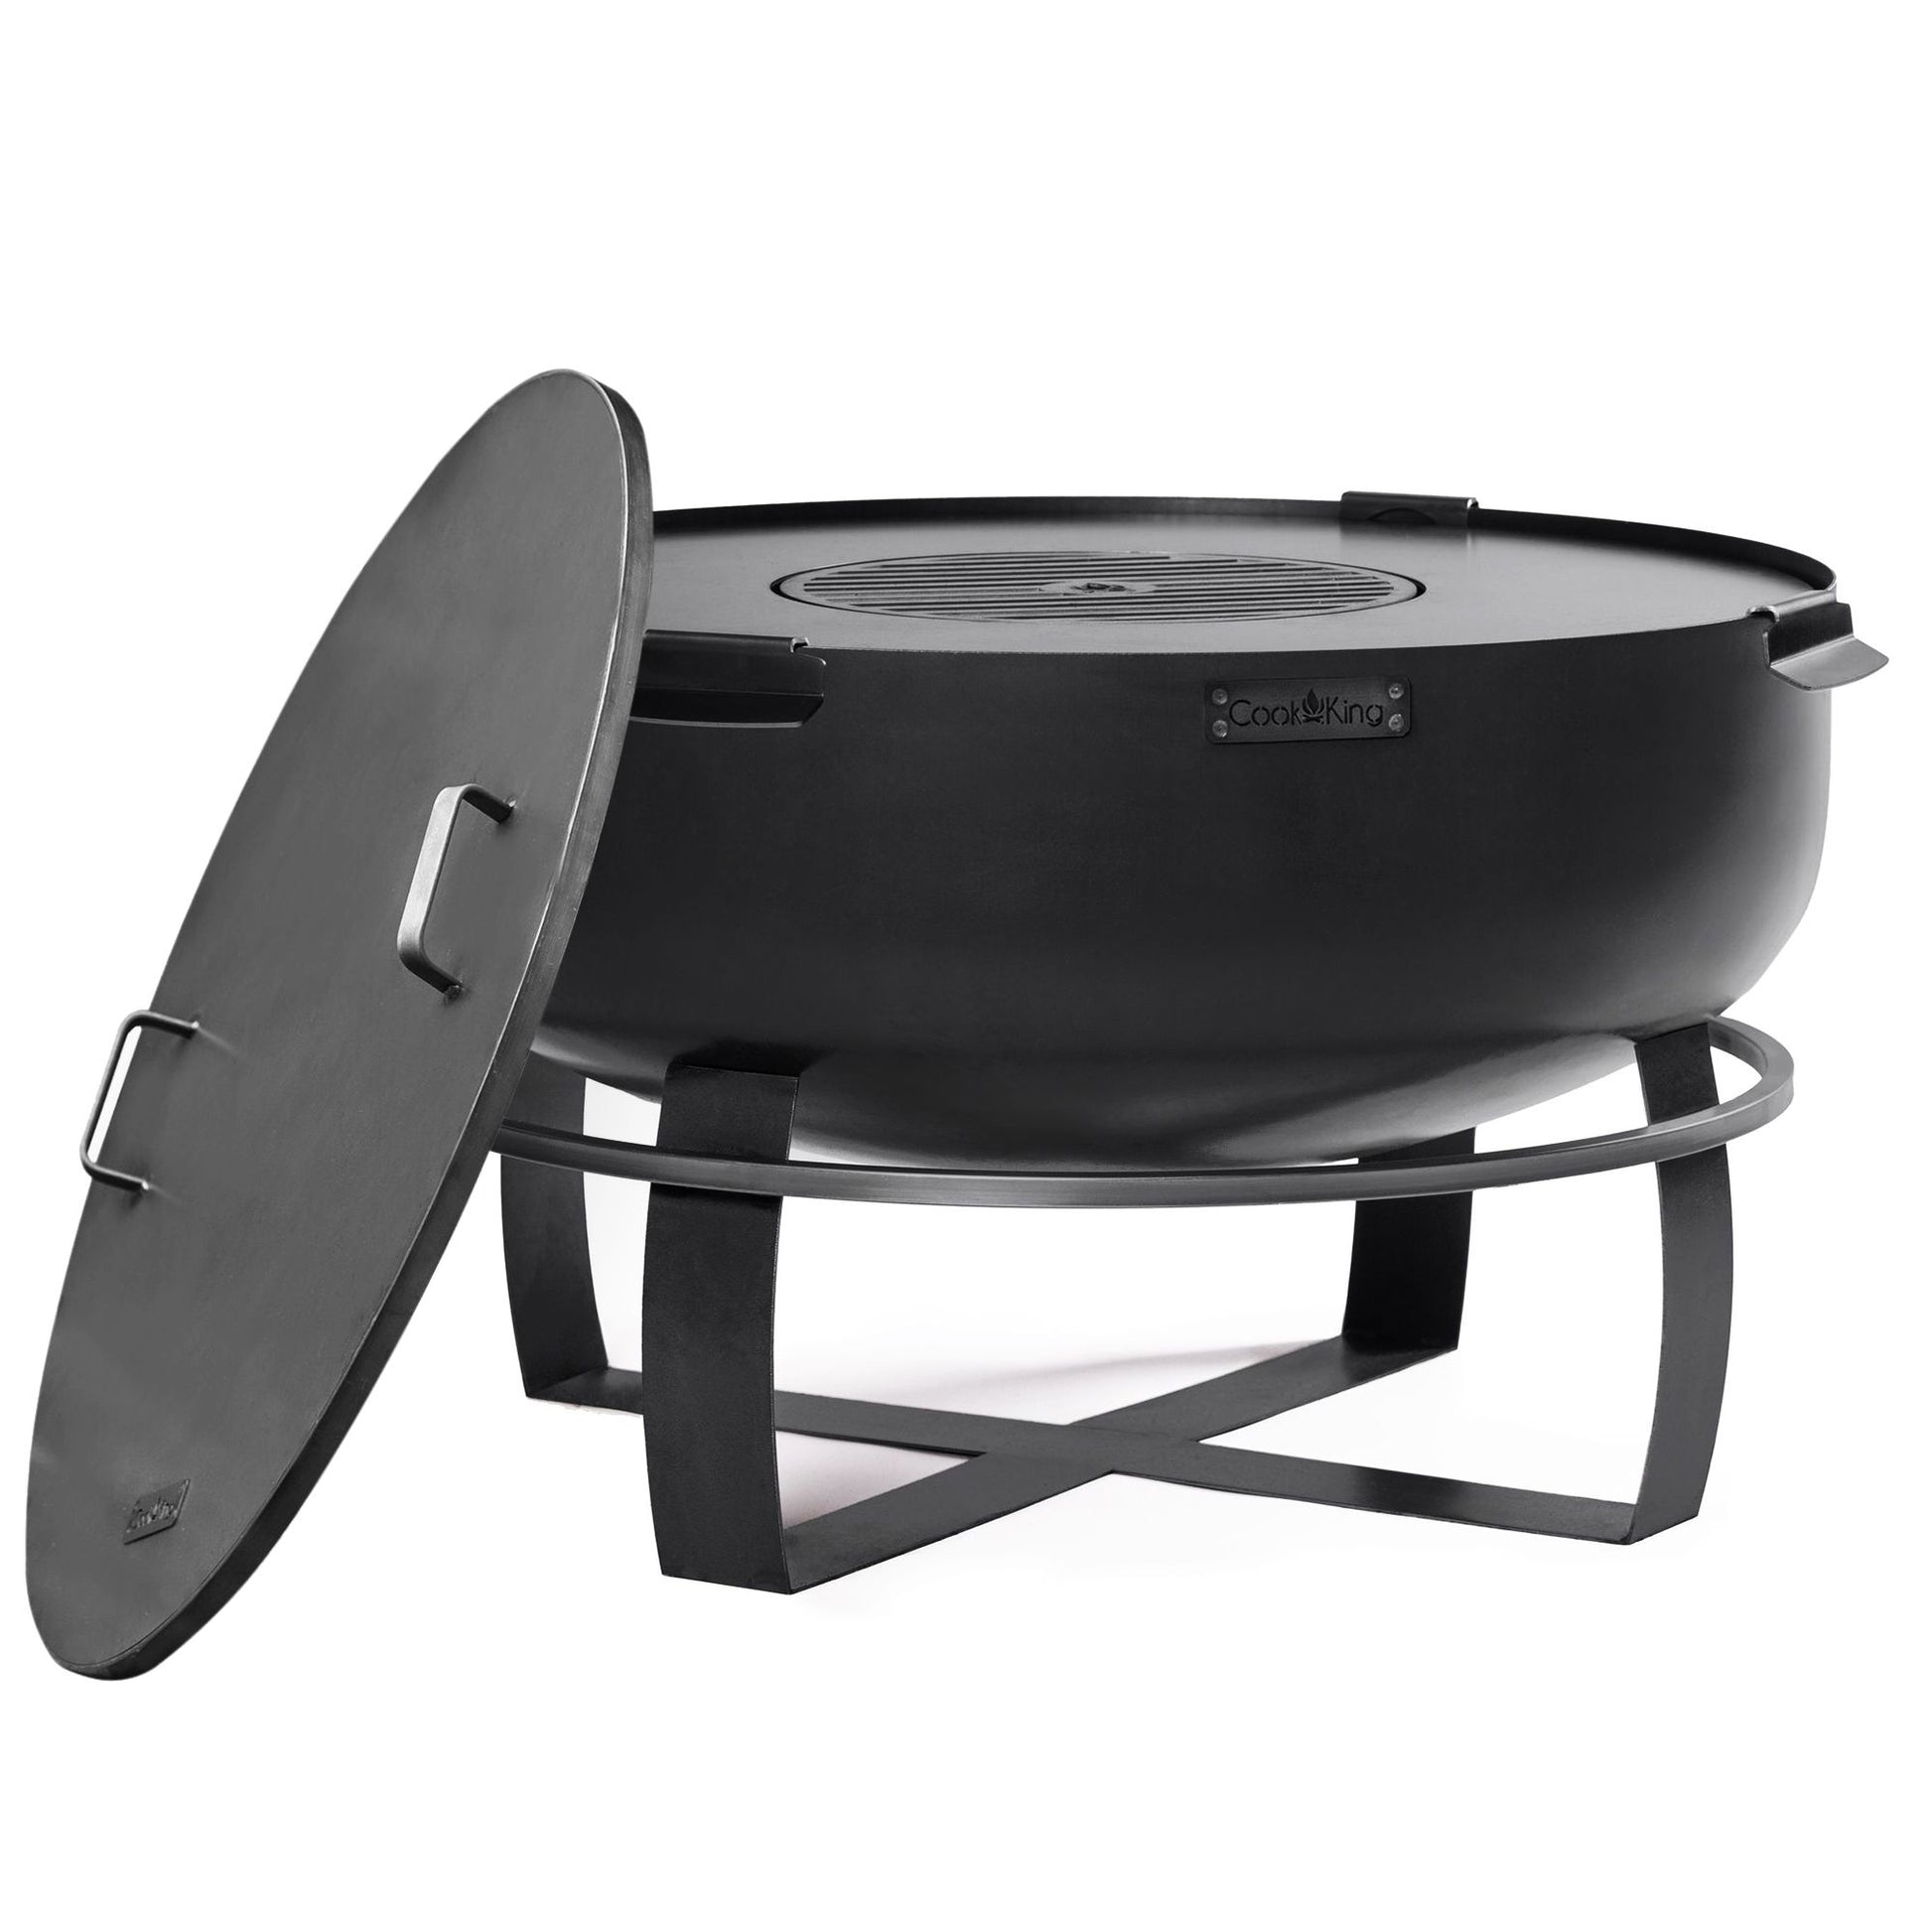 Ignition 32" XXL Fire Pit with Grill Plate and Cover Lid - Good Directions